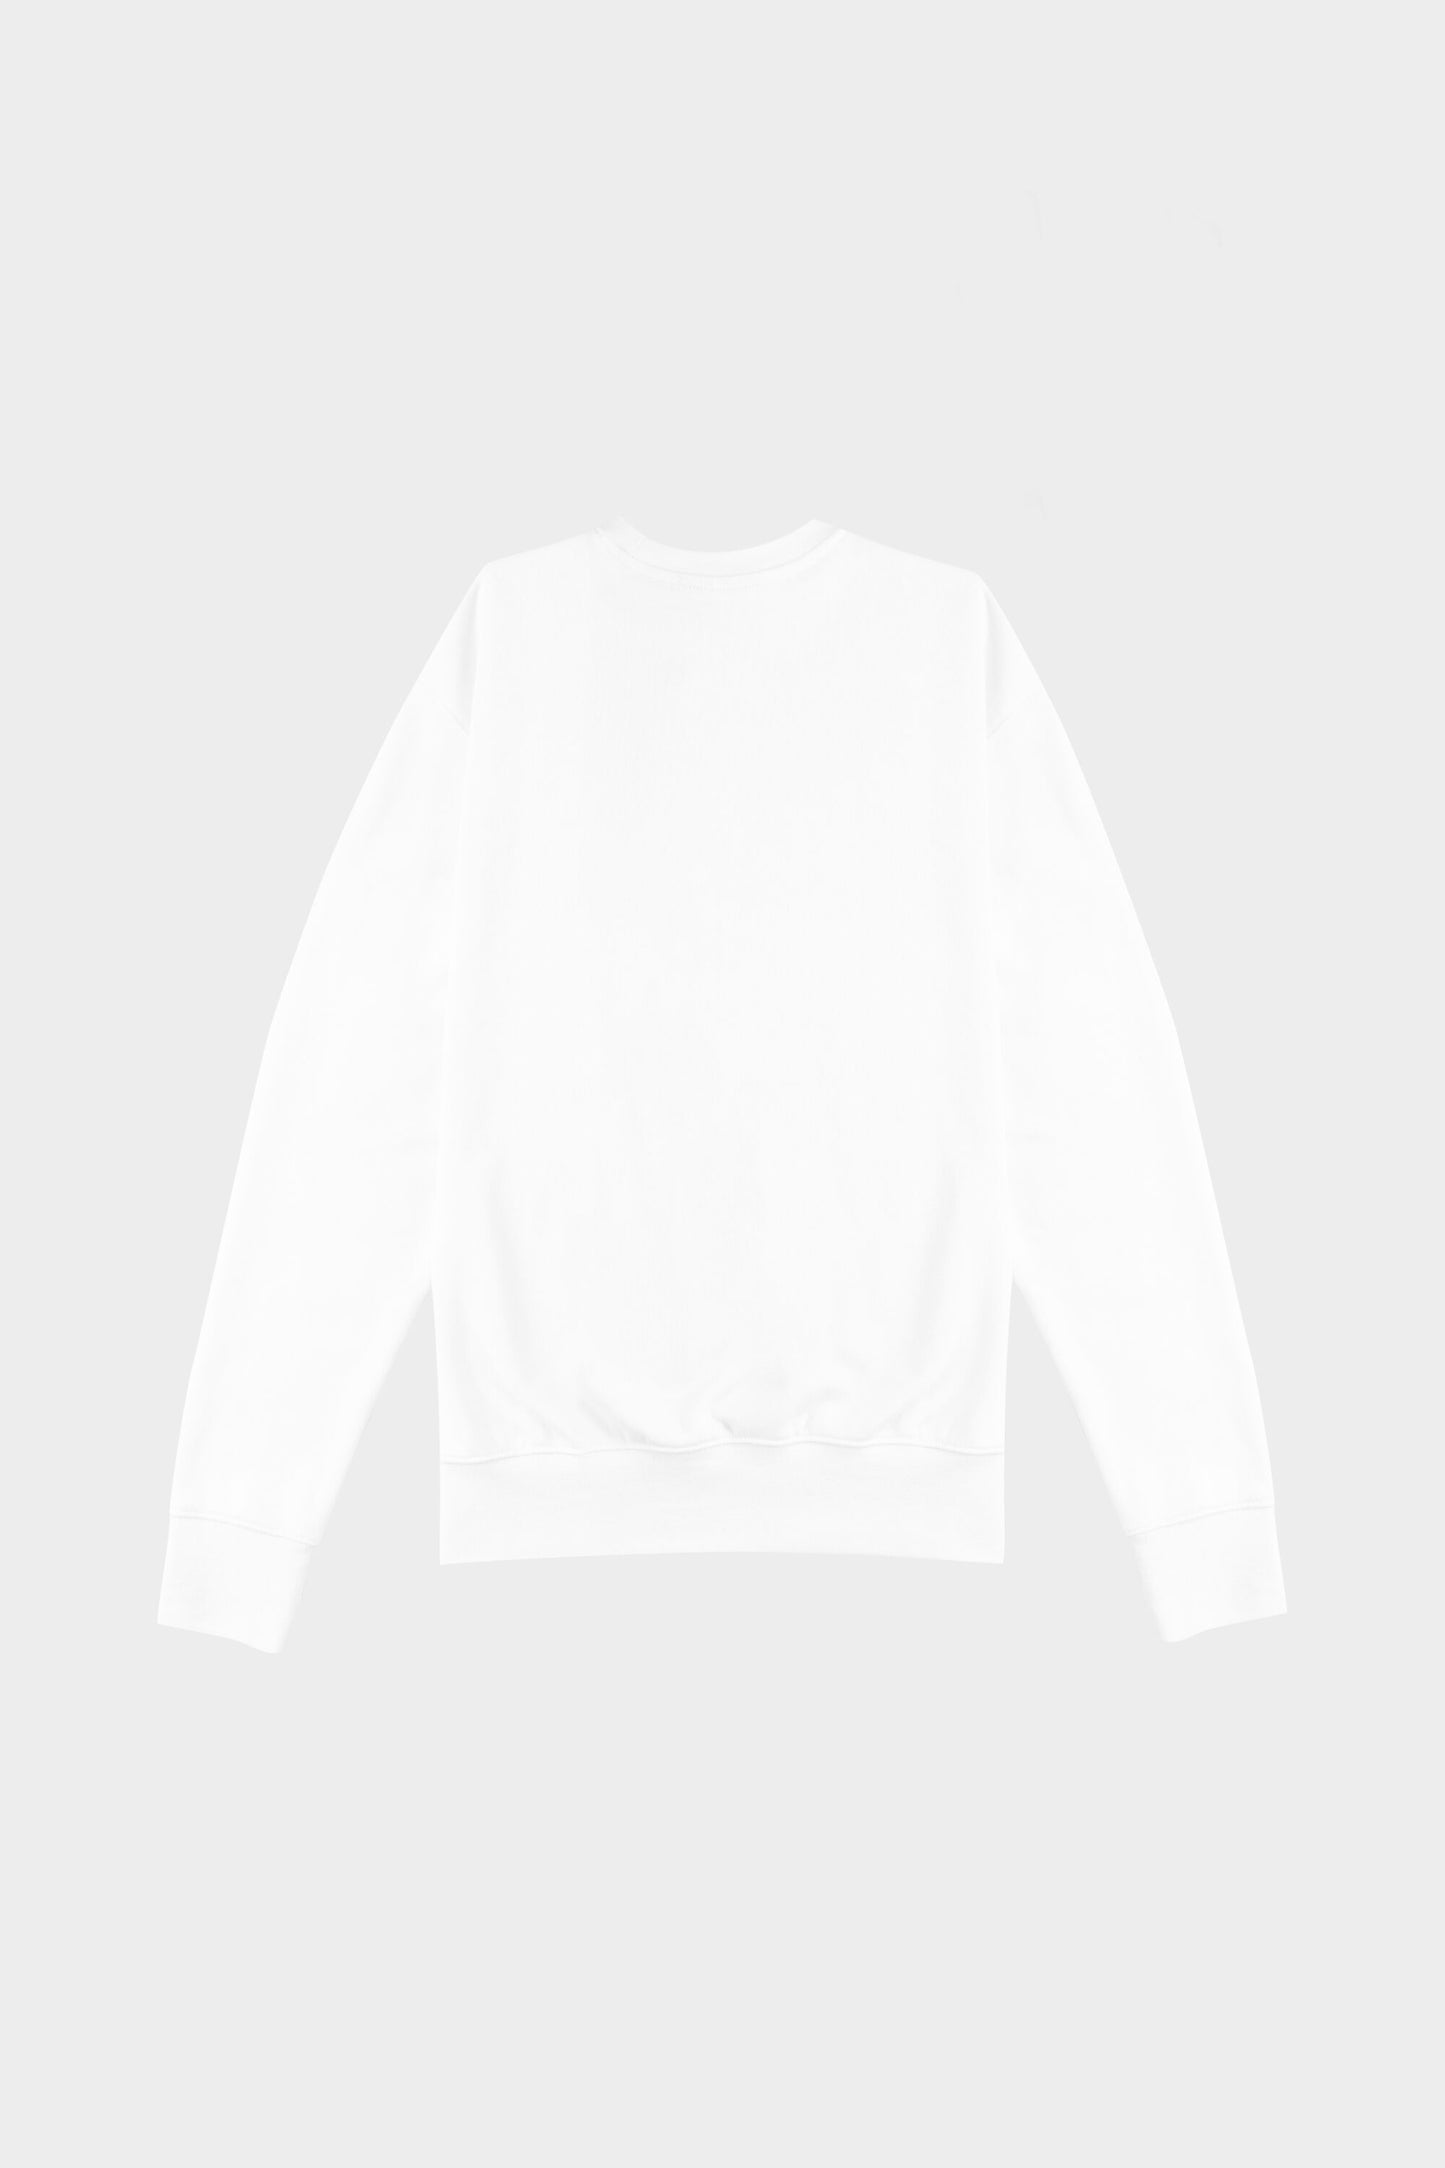 Pu Brand Relaxed Fit Crewneck Light Stone